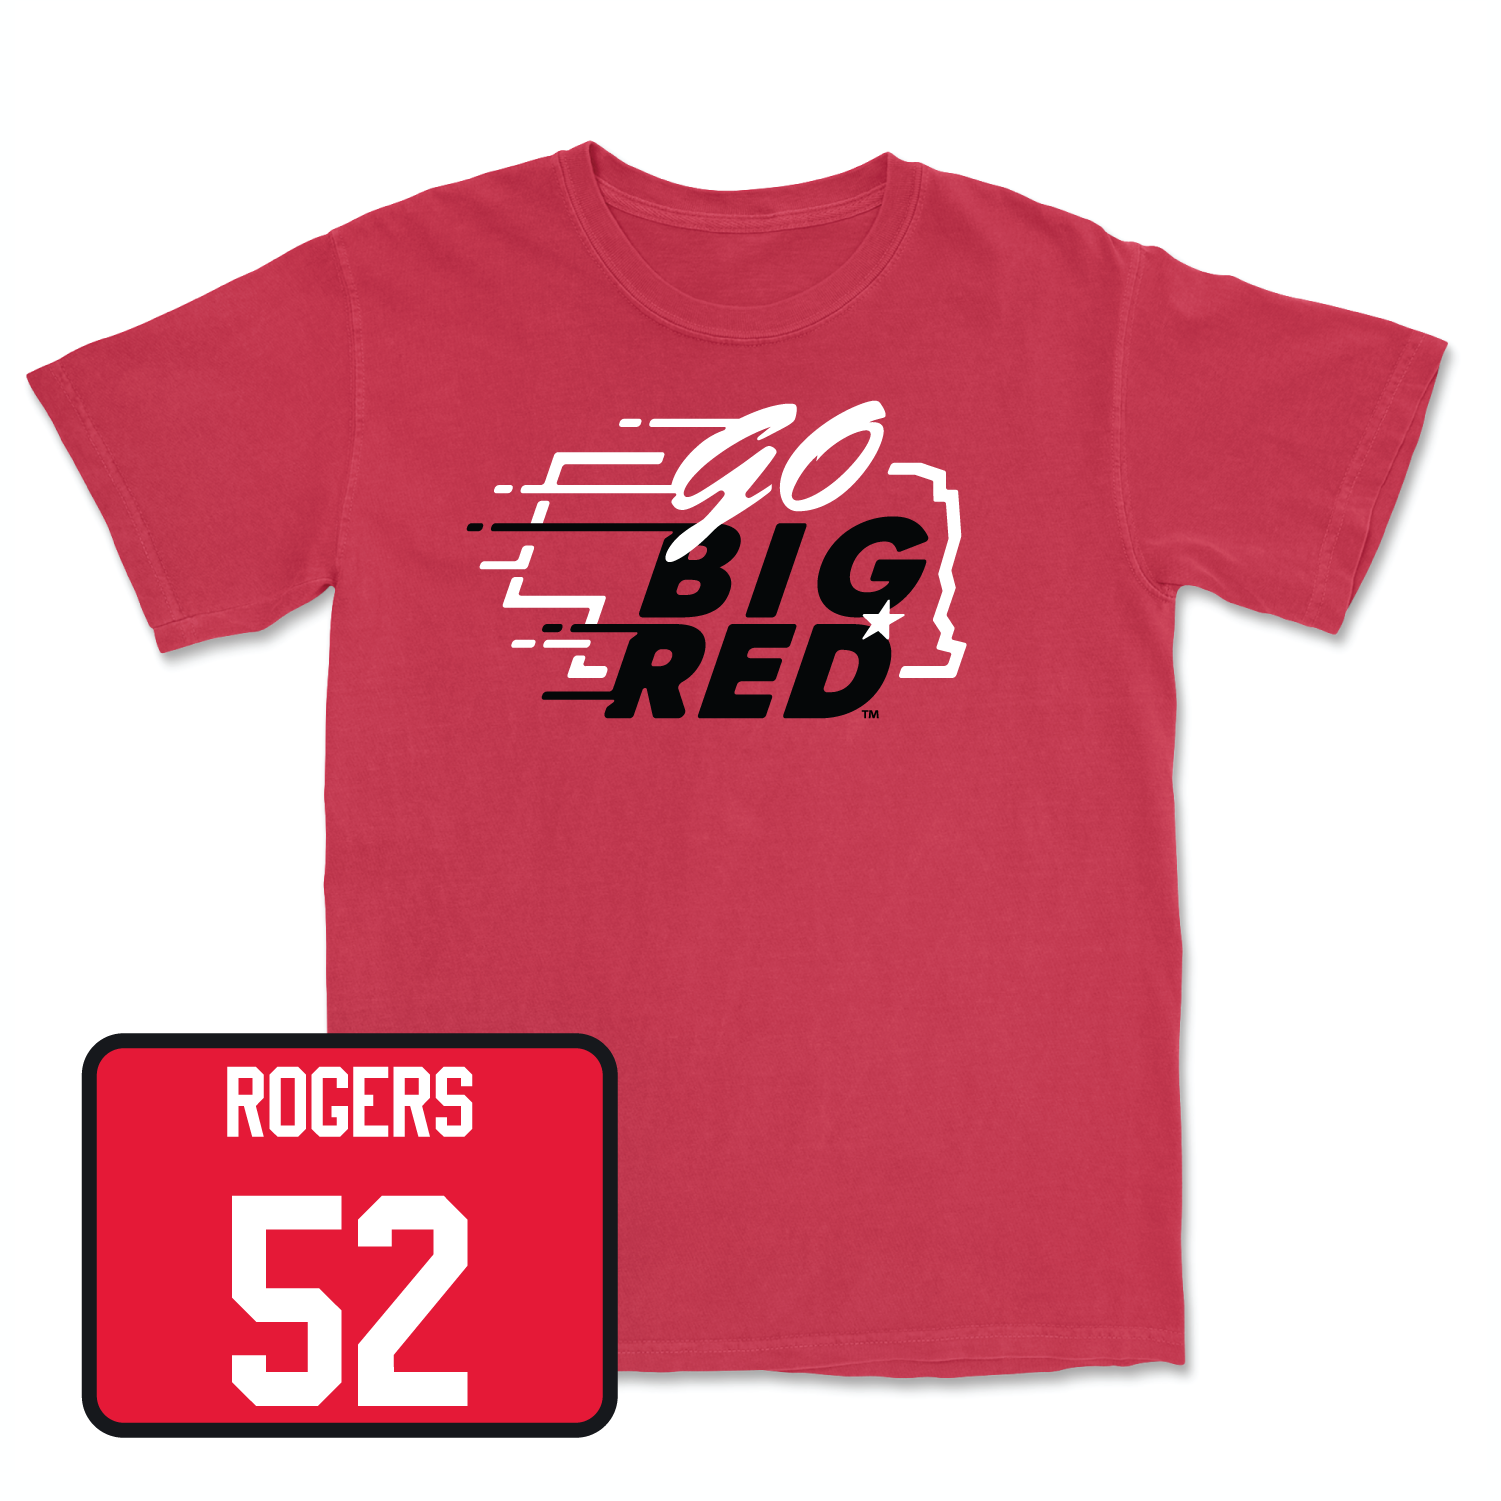 Red Football GBR Tee Youth Medium / Dylan Rogers | #52